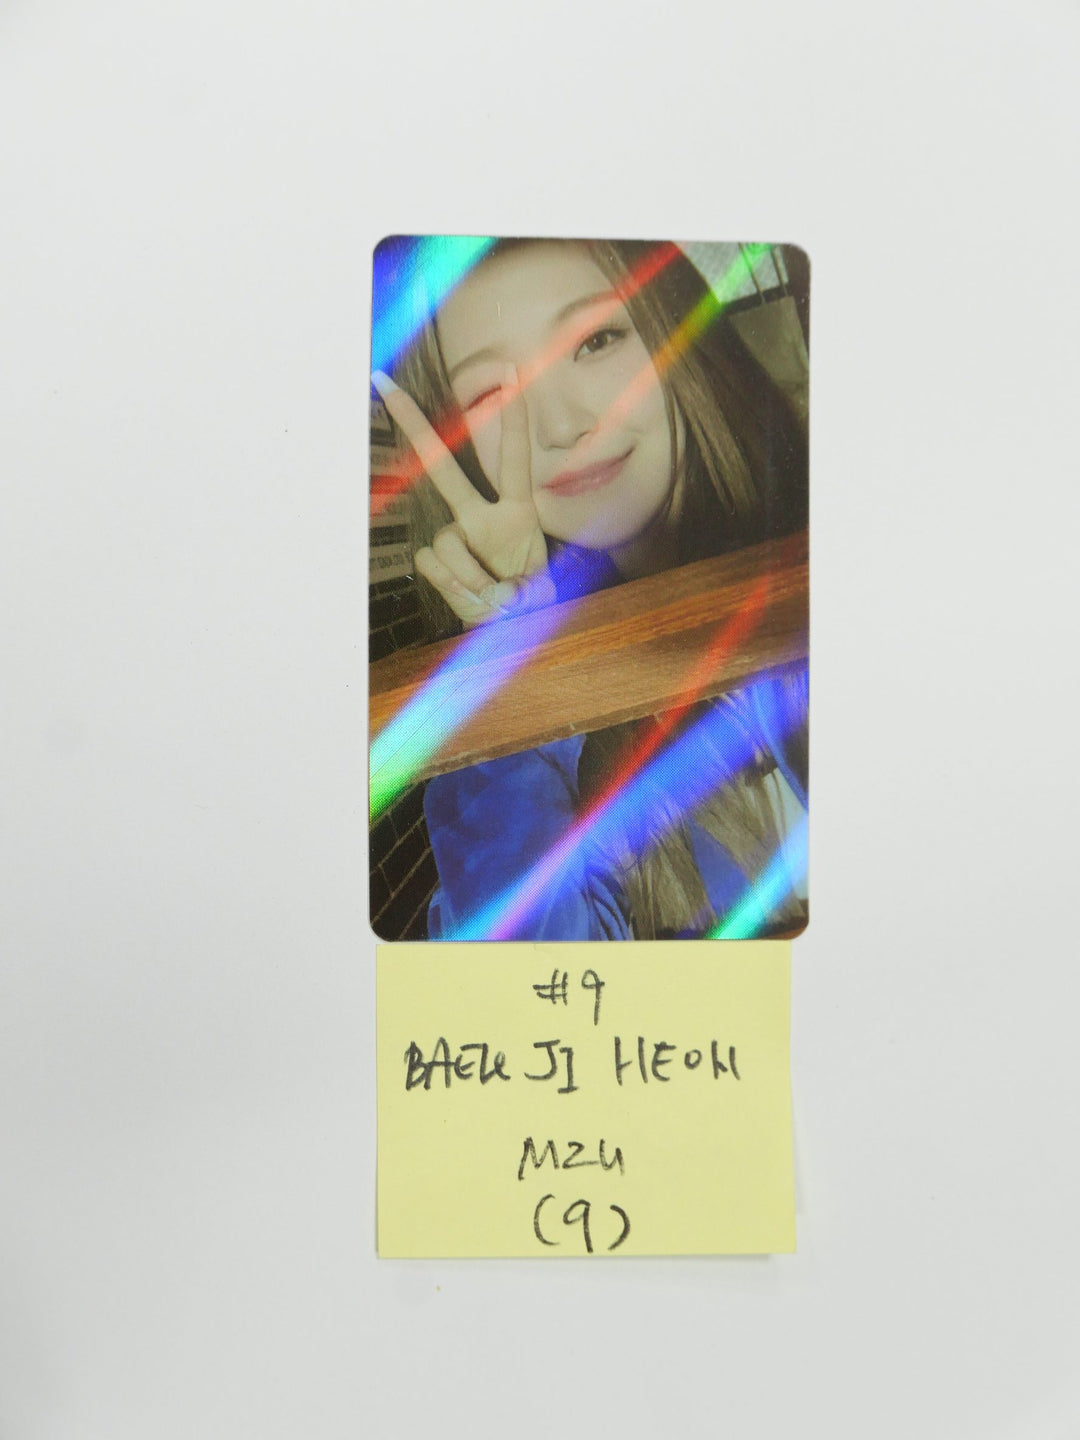 Fromis_9 "Midnight Guest" - M2U Luckydraw PVC Hologram Photocard